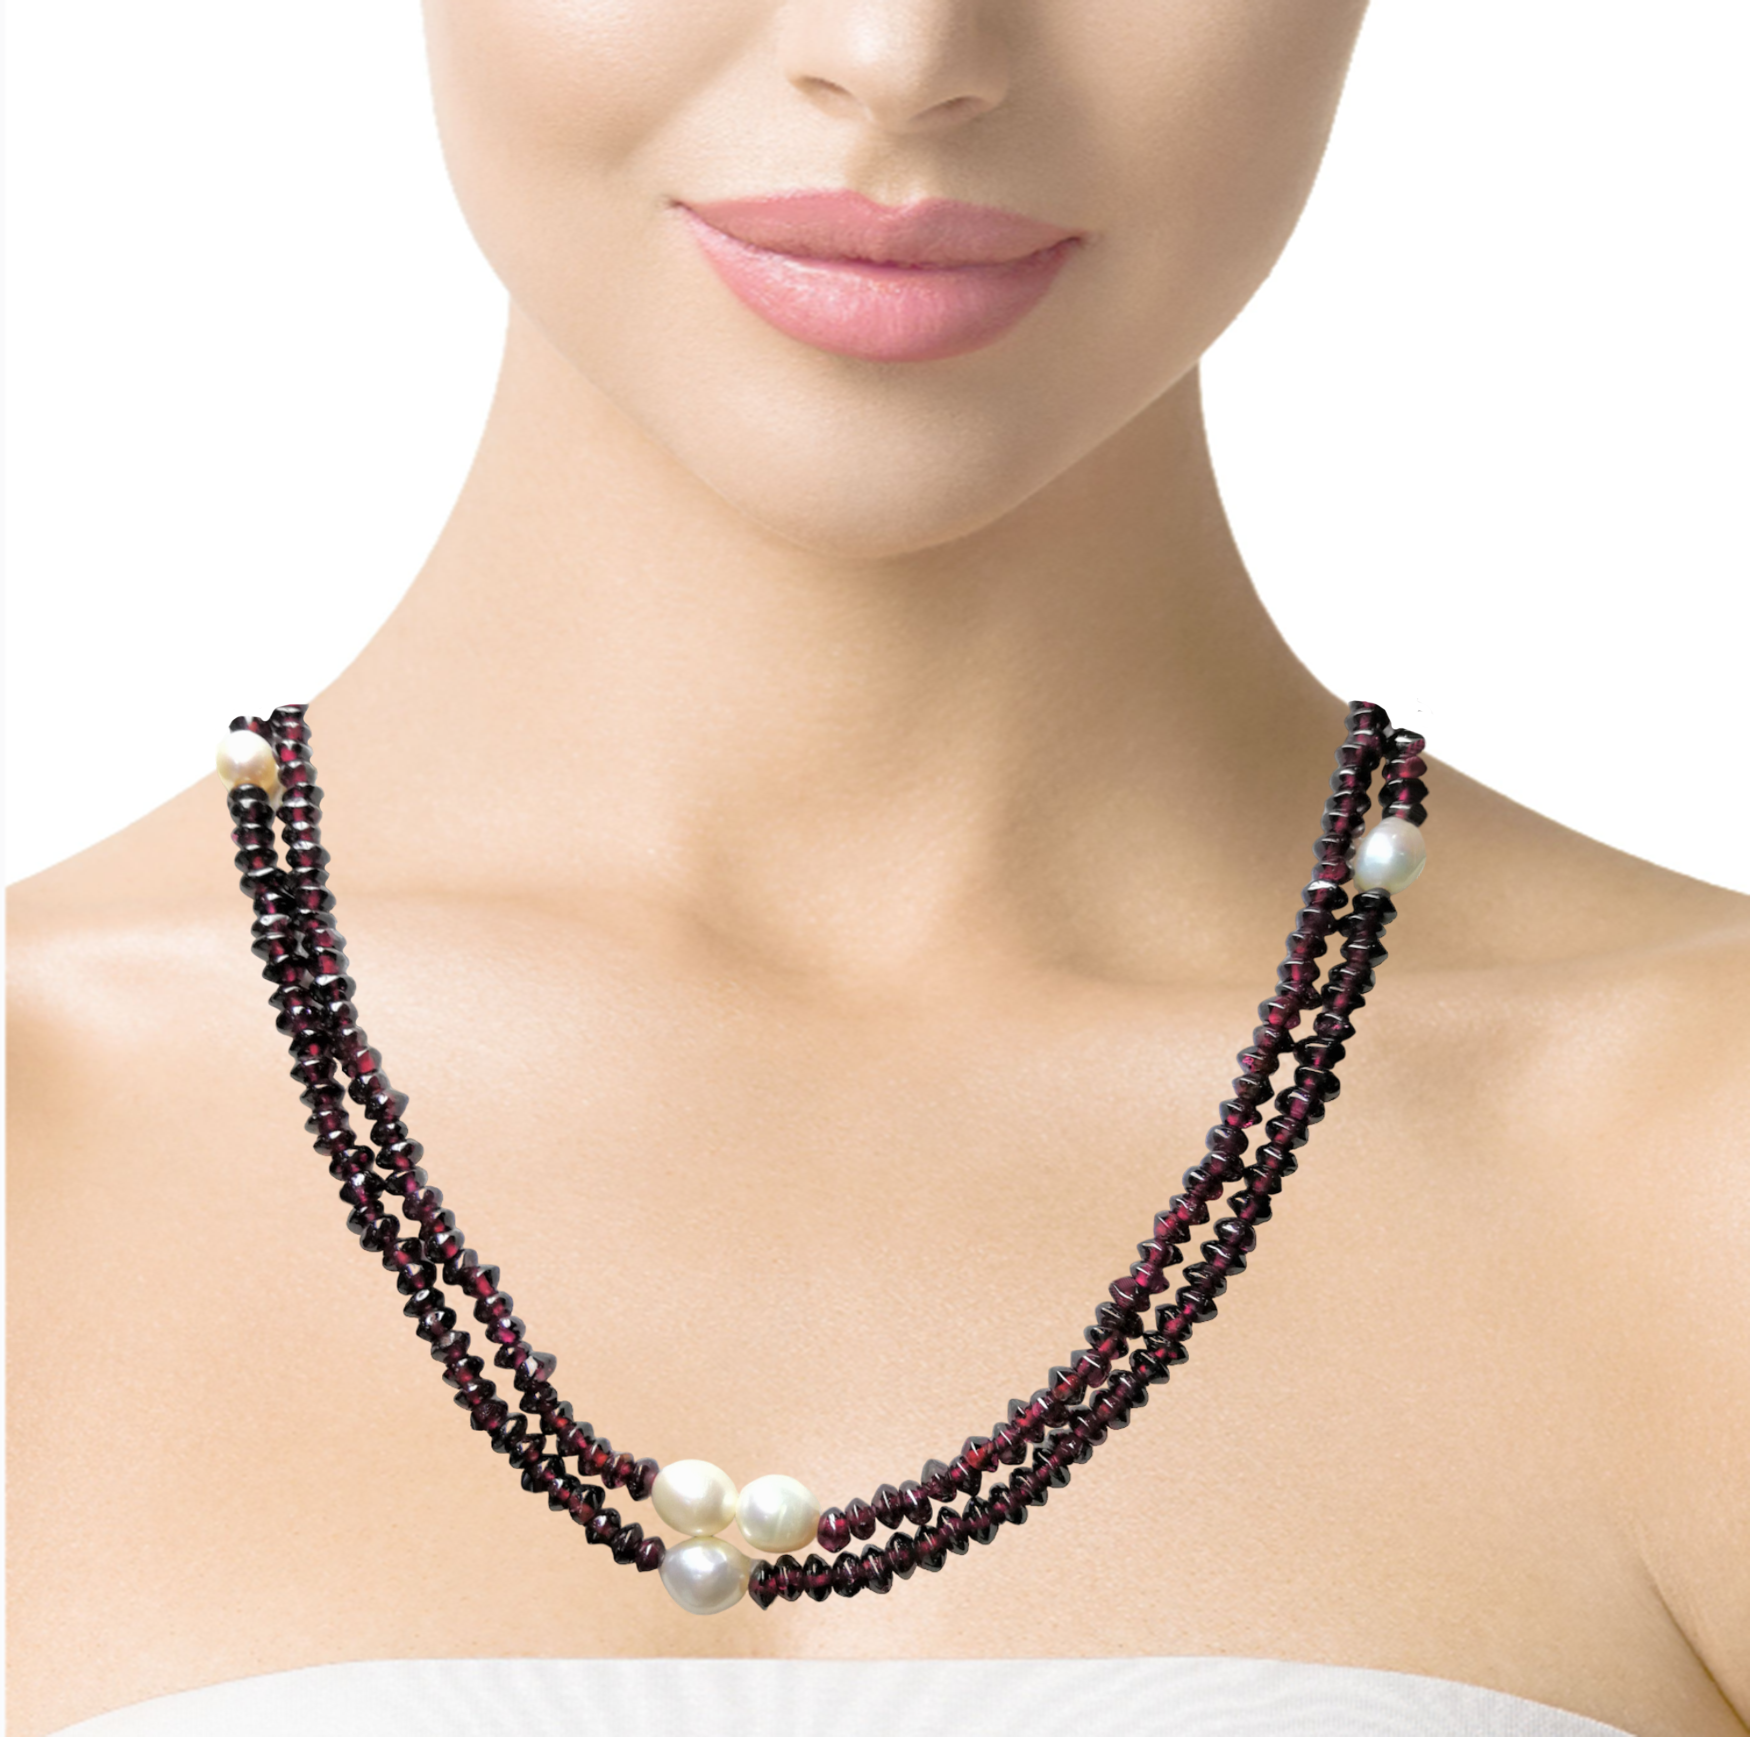 Natural Handmade Necklace 16"-18" Faceted Garnet Pearls Gemstone Beads Jewellery